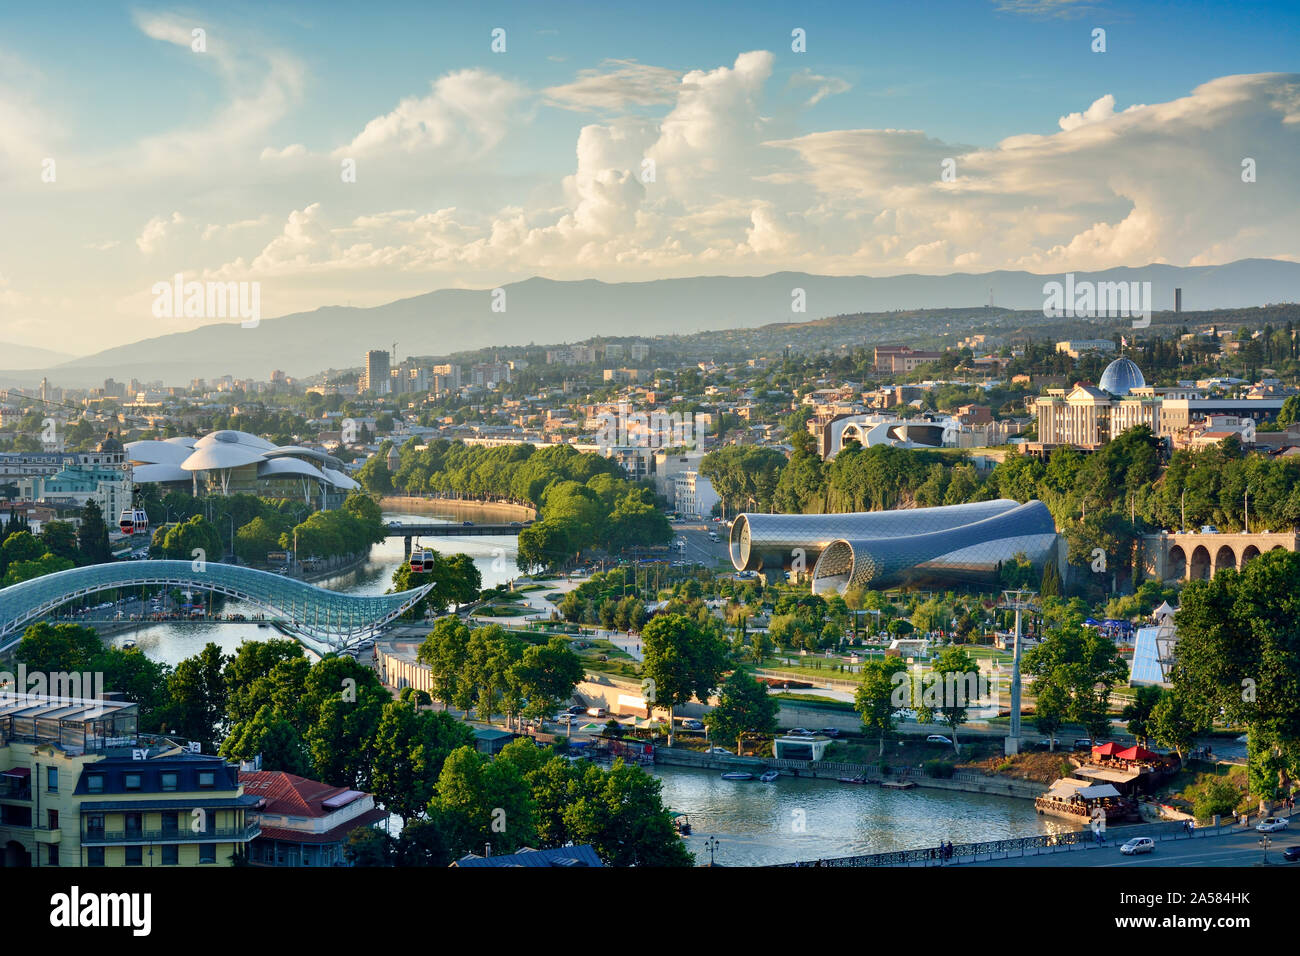 Bridge of Peace and the Mtkvari river. On the right, the Rike Park Music Theatre and Exhibition Hall and the Presidential Palace. Tbilisi, Georgia Stock Photo